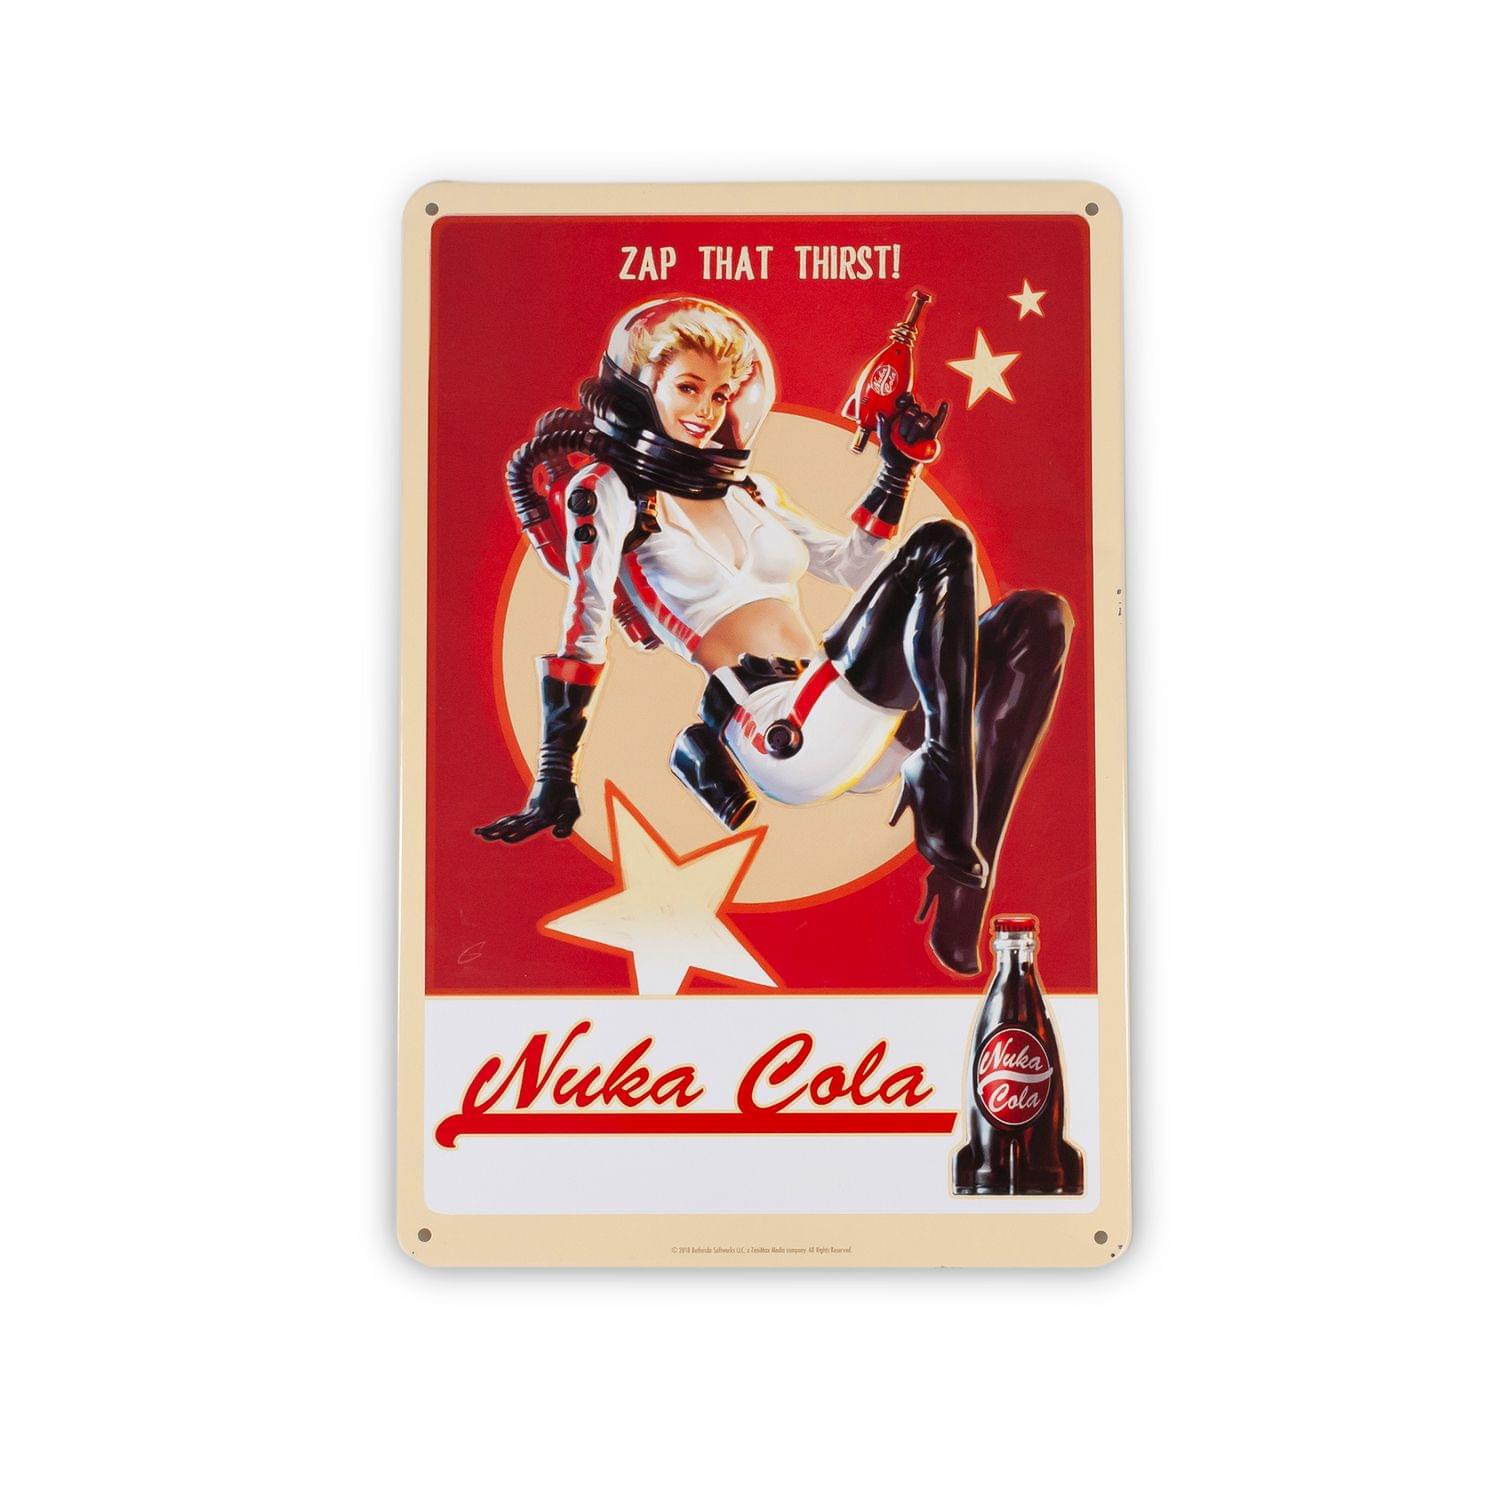 Fallout 76 Nuka Cola Girl Metal Sign | Fanwraps Official Lithograph | 6" x 9"